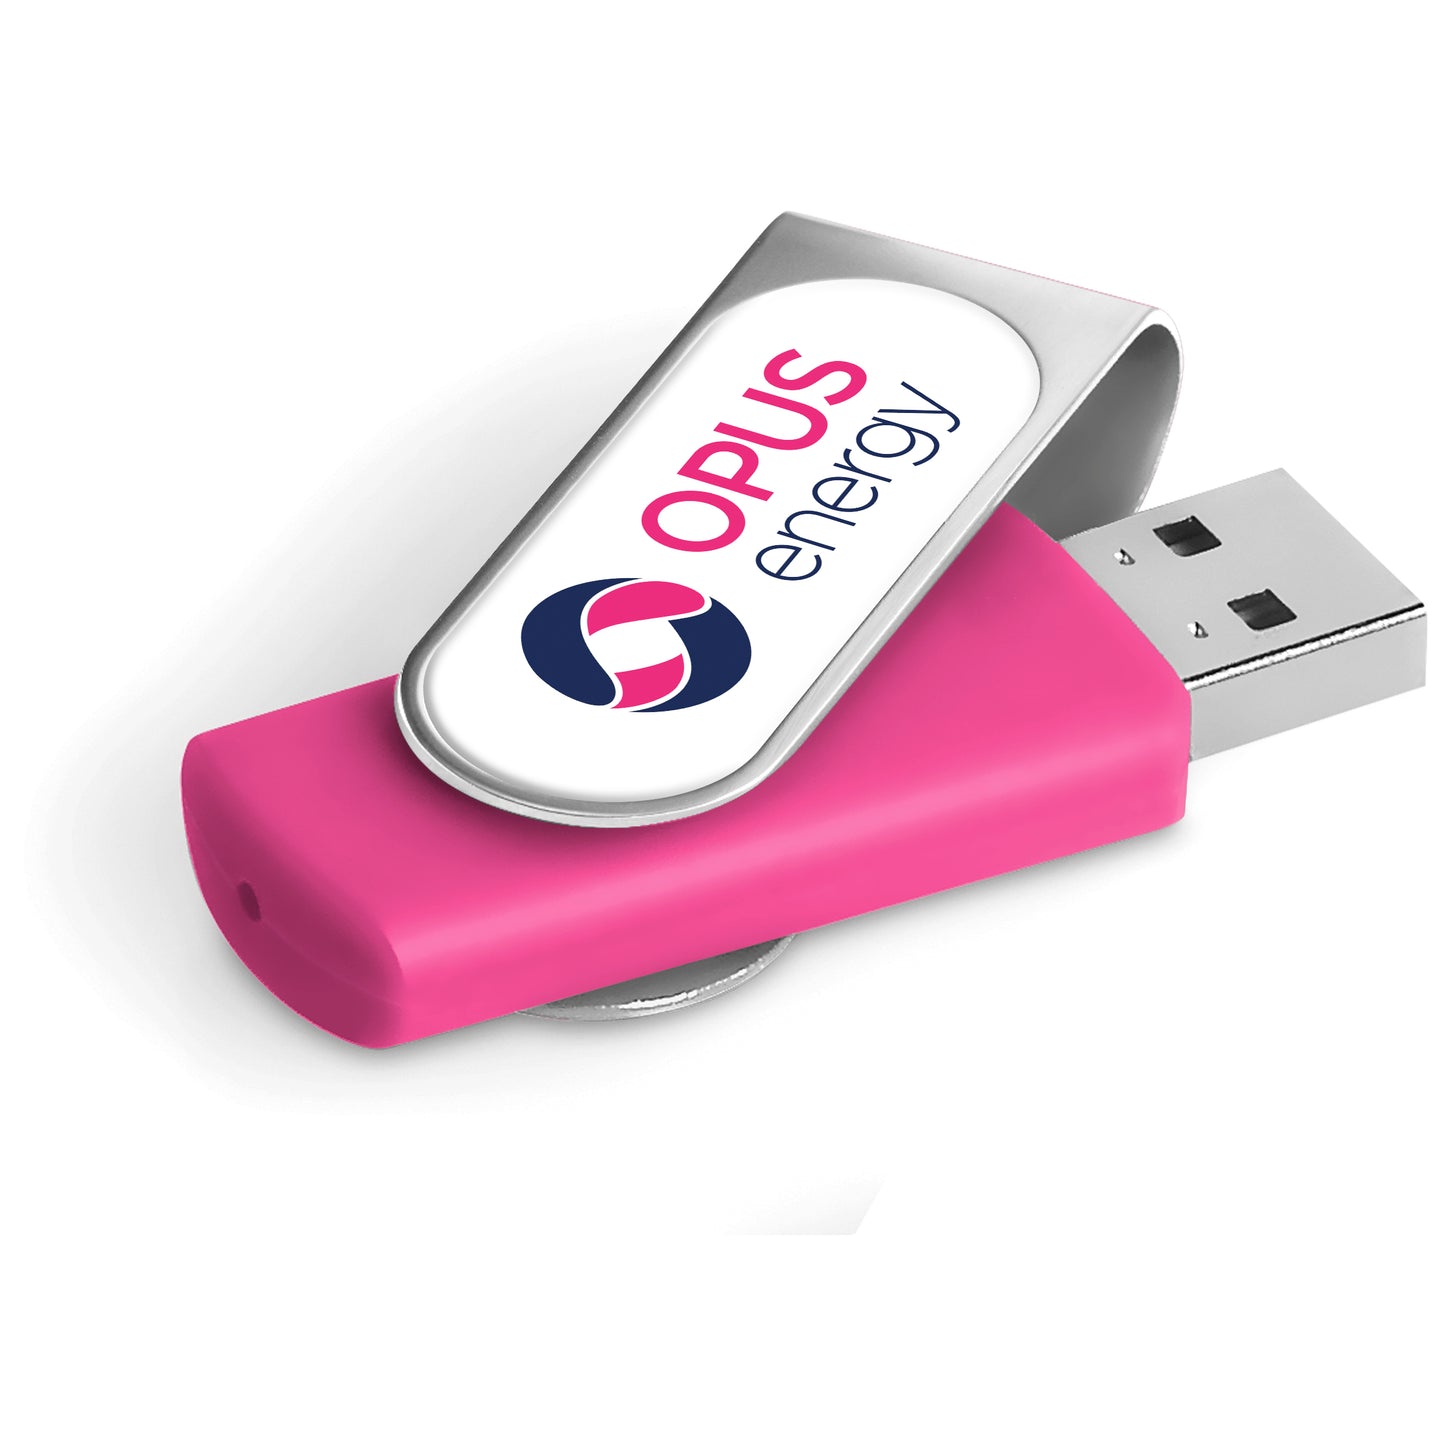 Axis 16Gb Dome Memory Stick